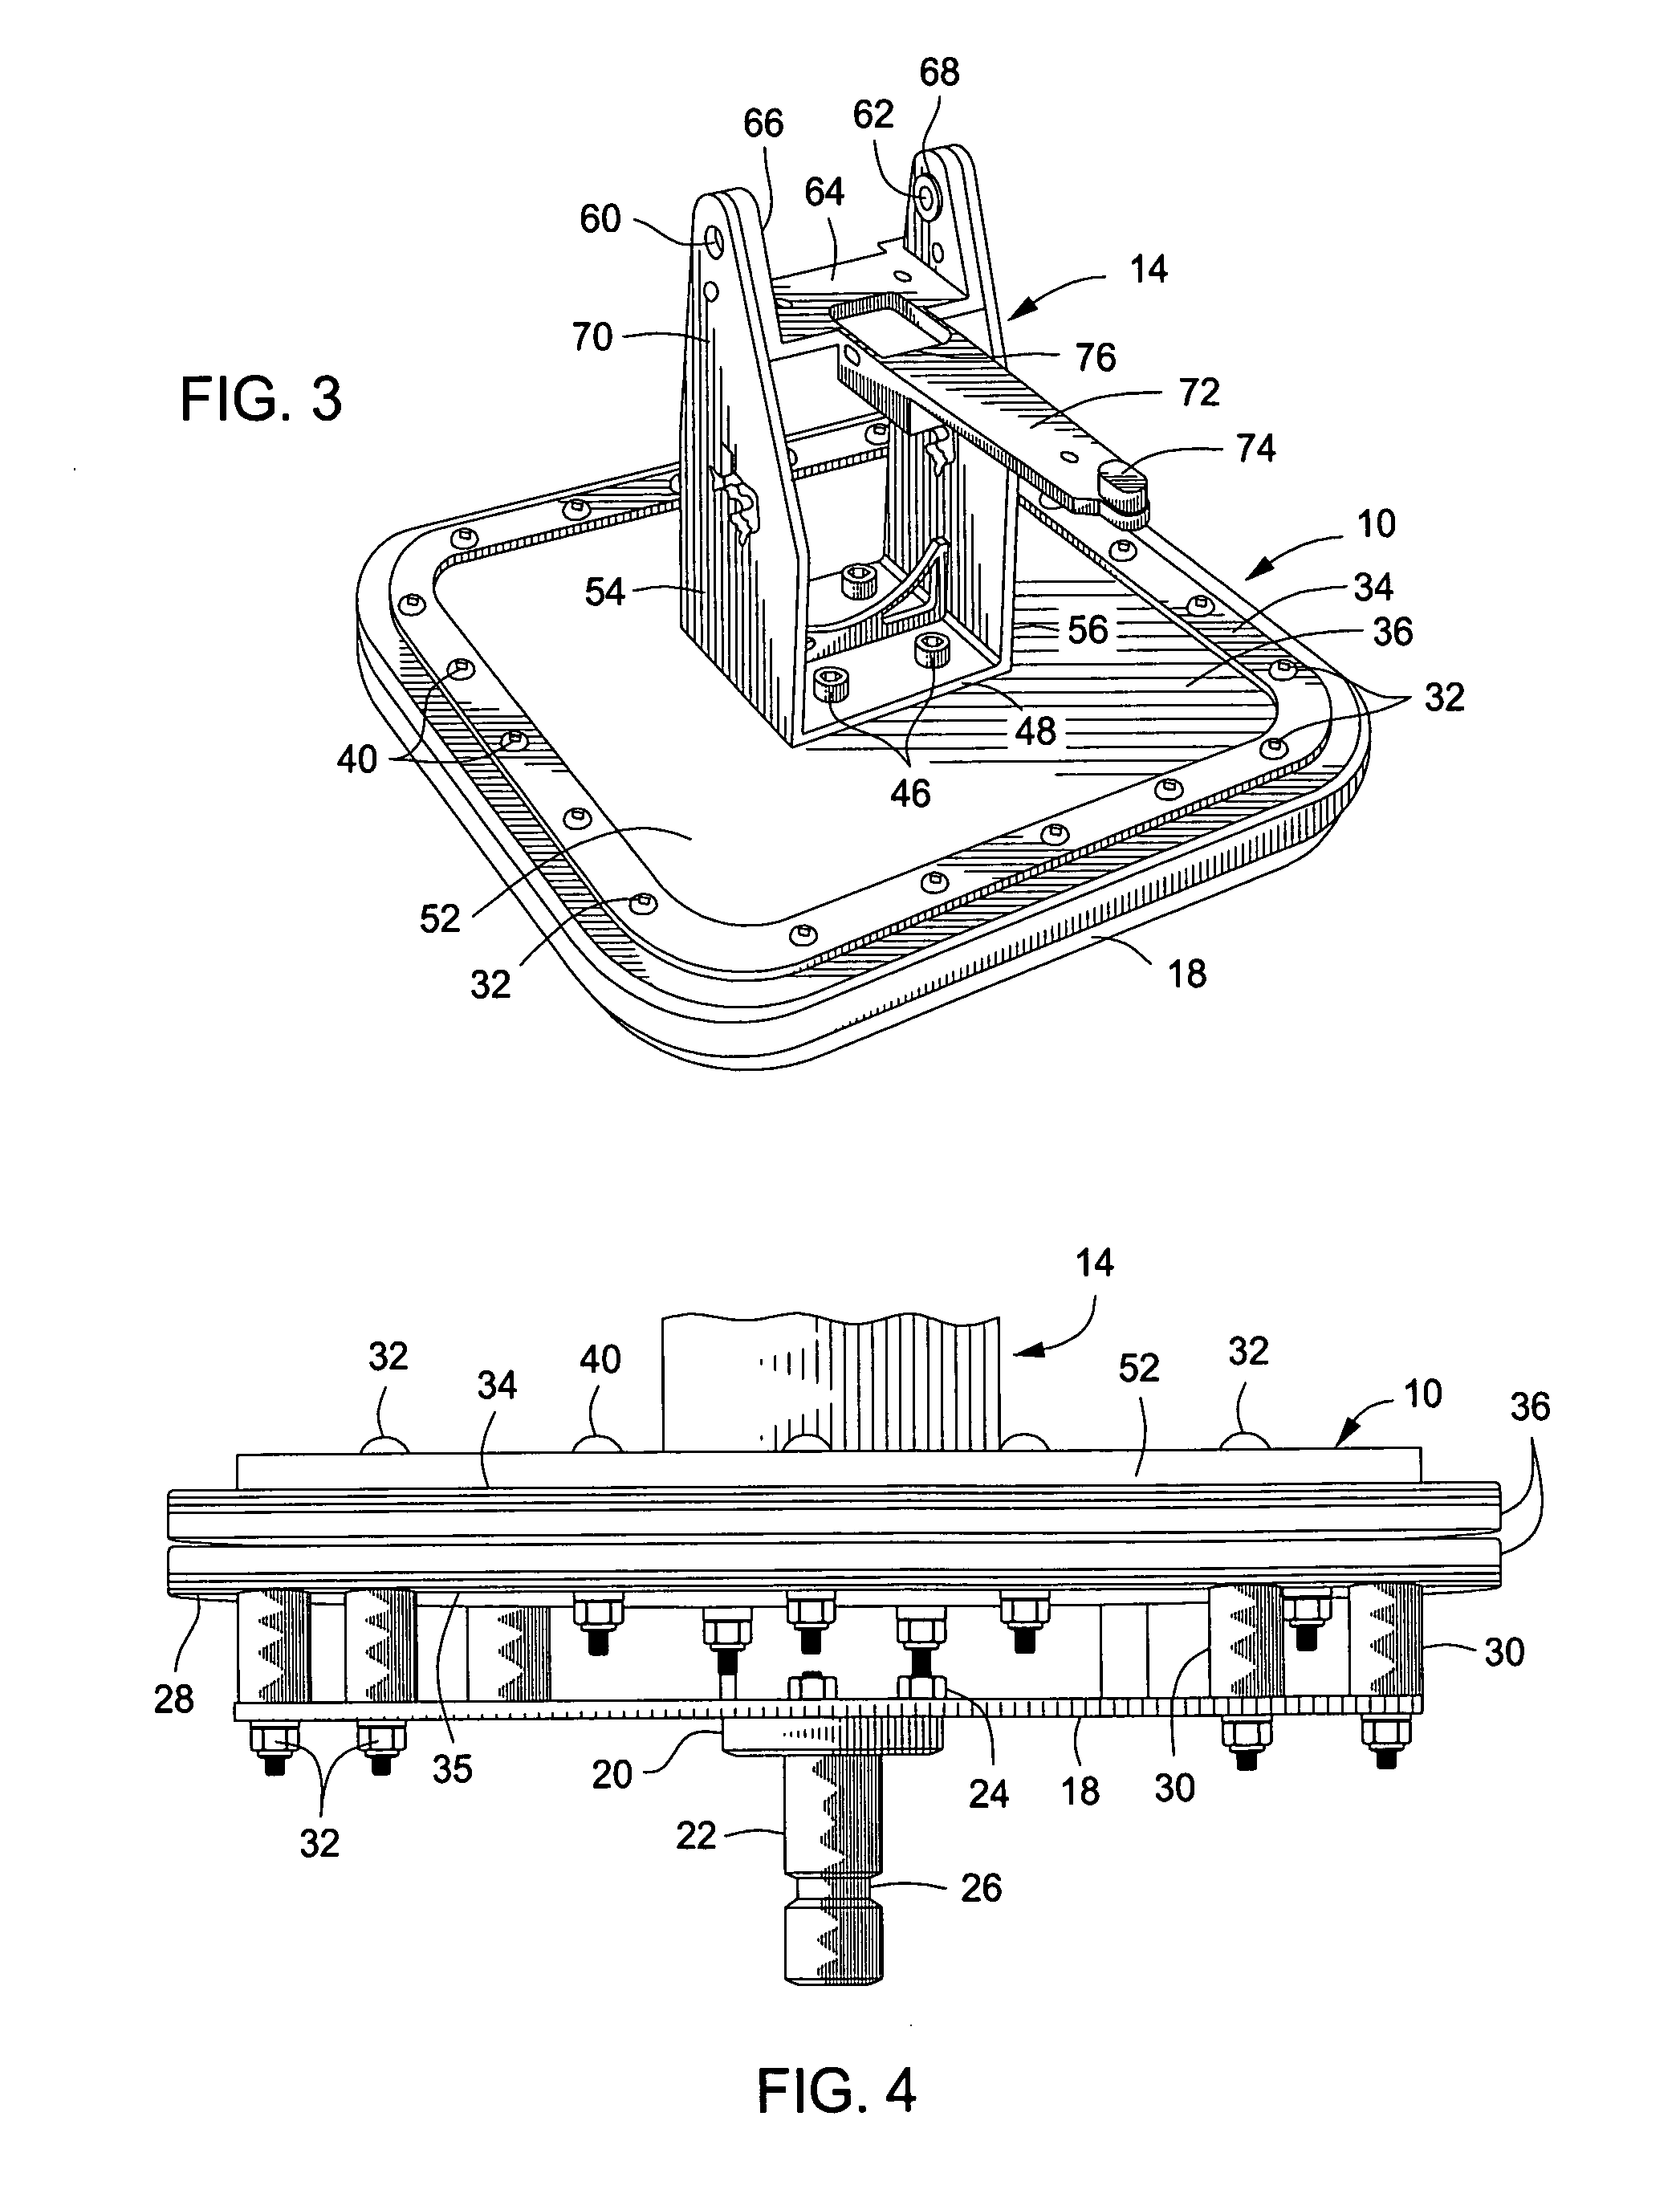 Vibration dampening firearm mount for vehicles